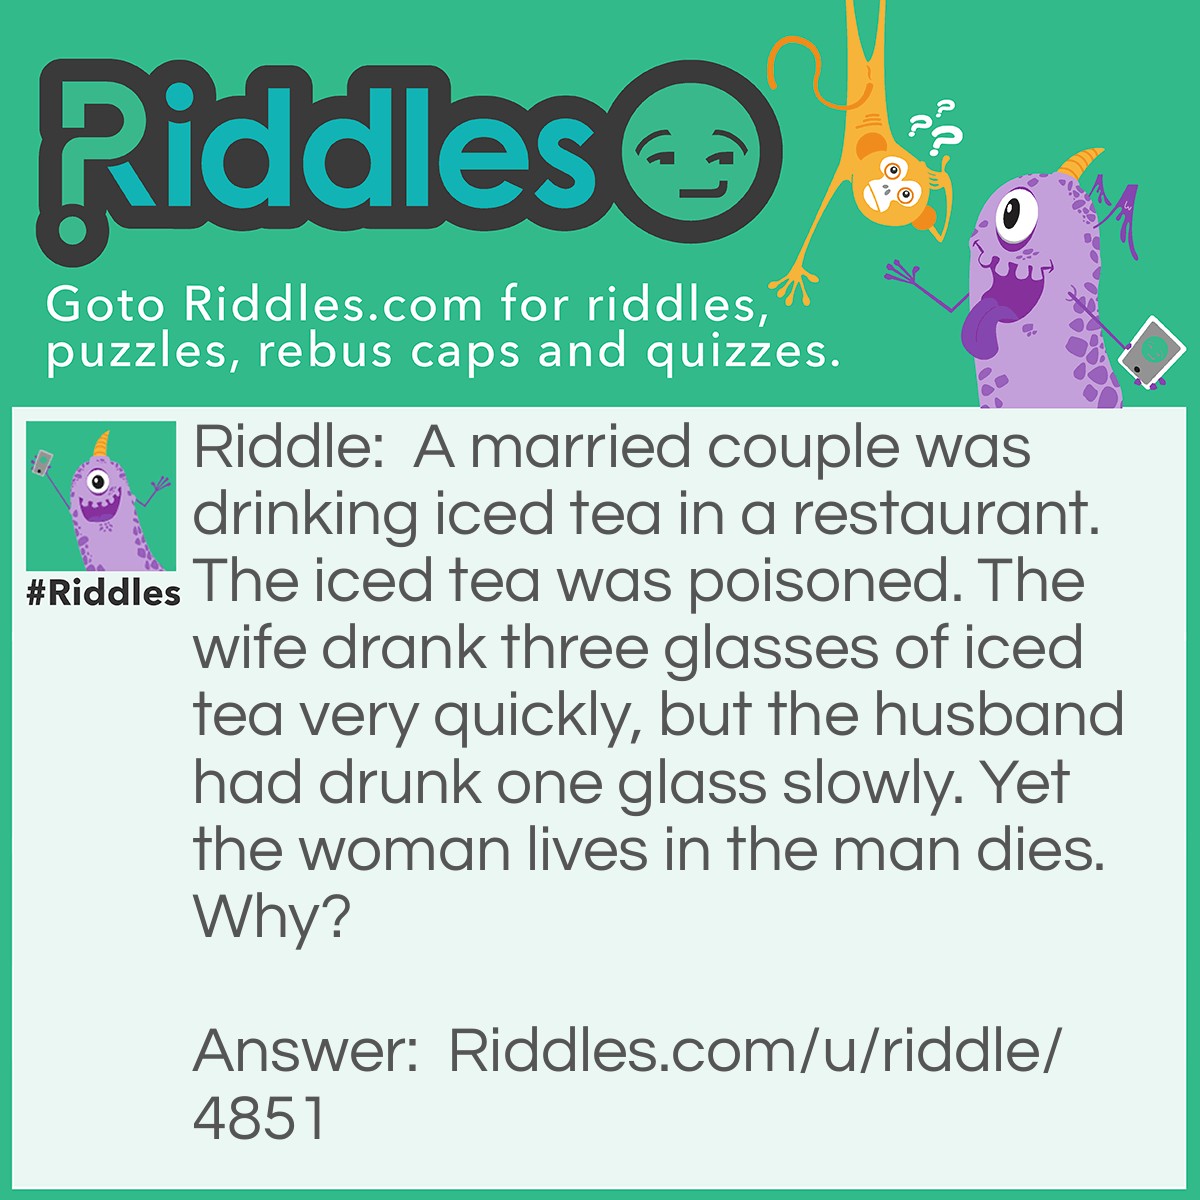 Riddle: A married couple was drinking iced tea in a restaurant. The iced tea was poisoned. The wife drank three glasses of iced tea very quickly, but the husband had drunk one glass slowly. Yet the woman lives in the man dies. Why? Answer: The ice was poisoned, and when the wife drank three glasses, she did not let the ice melt into her beverage. On the other hand, the husband drank the iced tea slowly, causing the poisoned ice to melt into his drink.